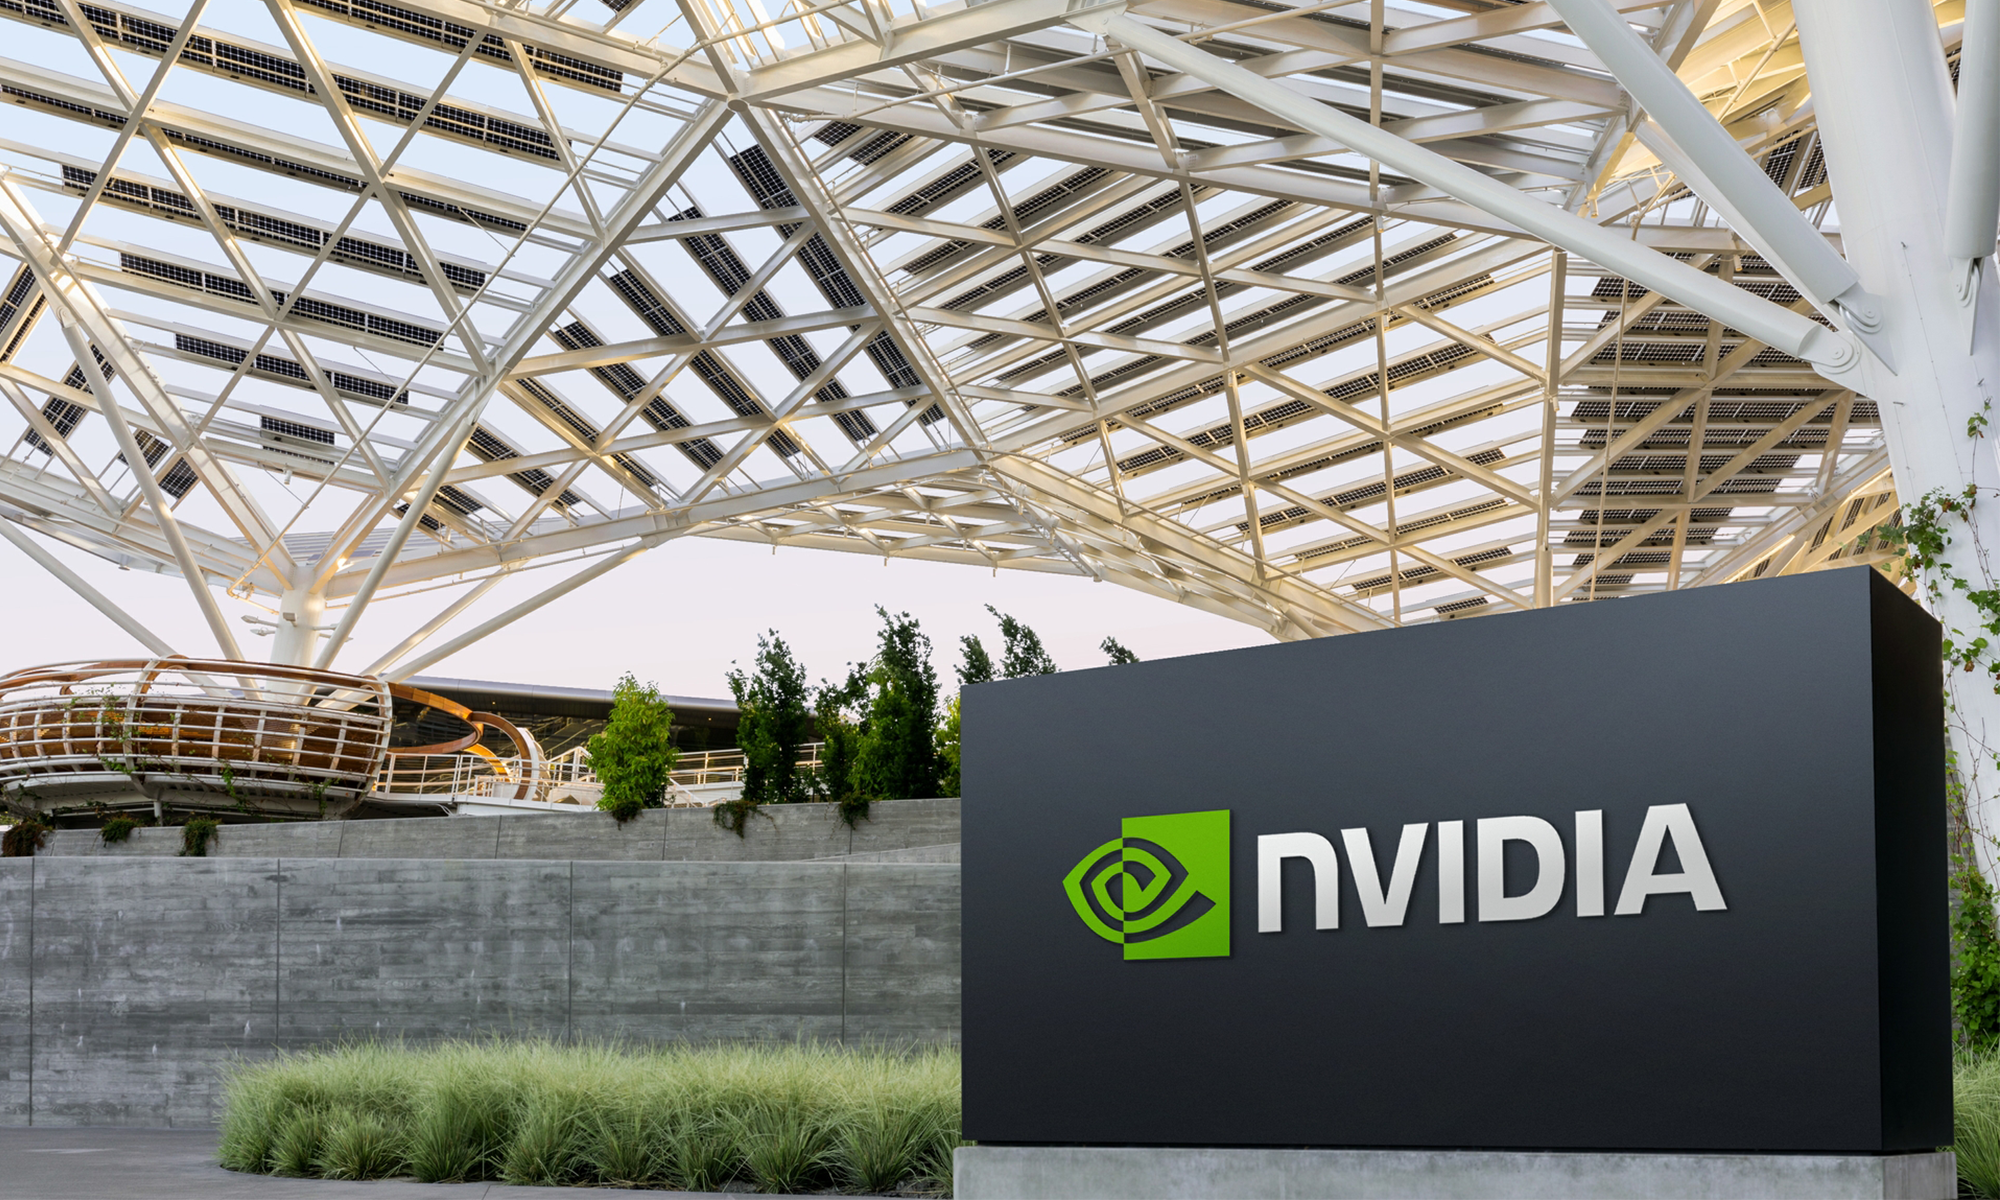 Nvidia and Reddit Stock Investors Just Got Spectacular Artificial Intelligence (AI) Updates